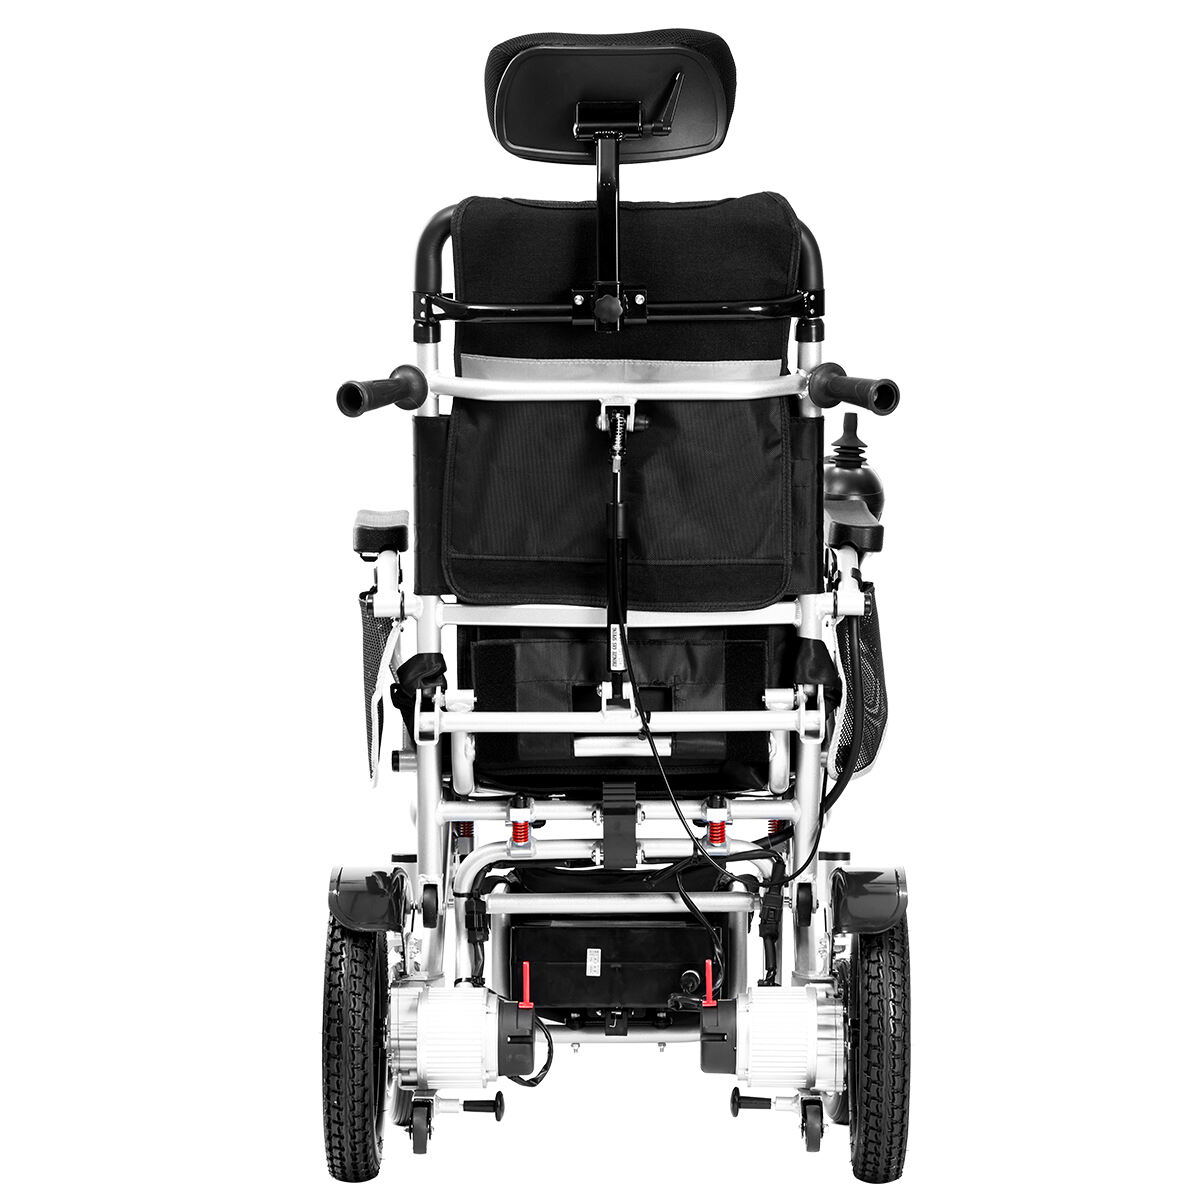 BC-EA9000MR High Backrest Manual Folding Electric Wheelchair for Handicapped